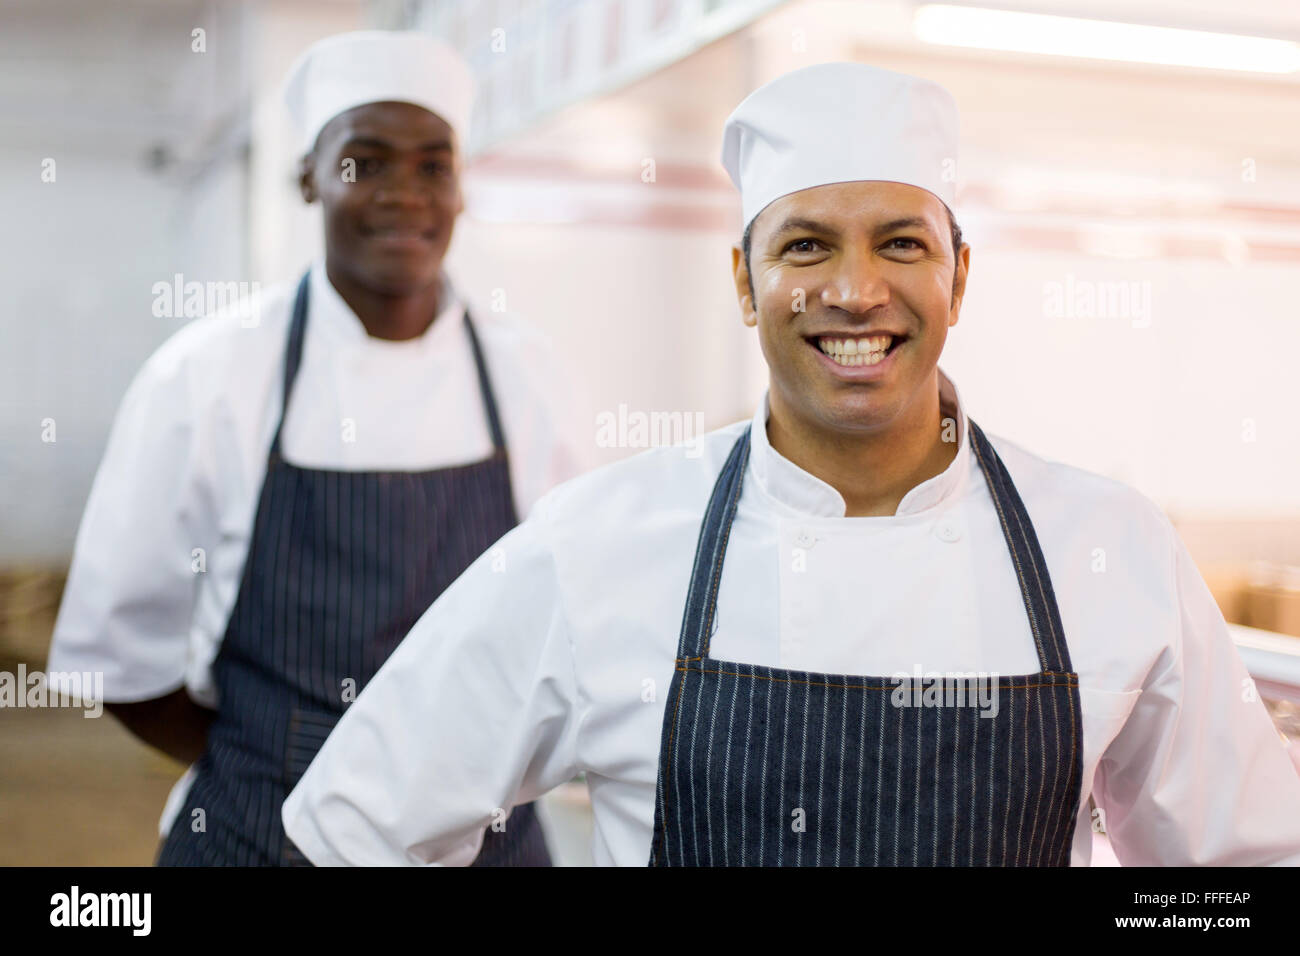 happy middle aged butchery owner and worker Stock Photo